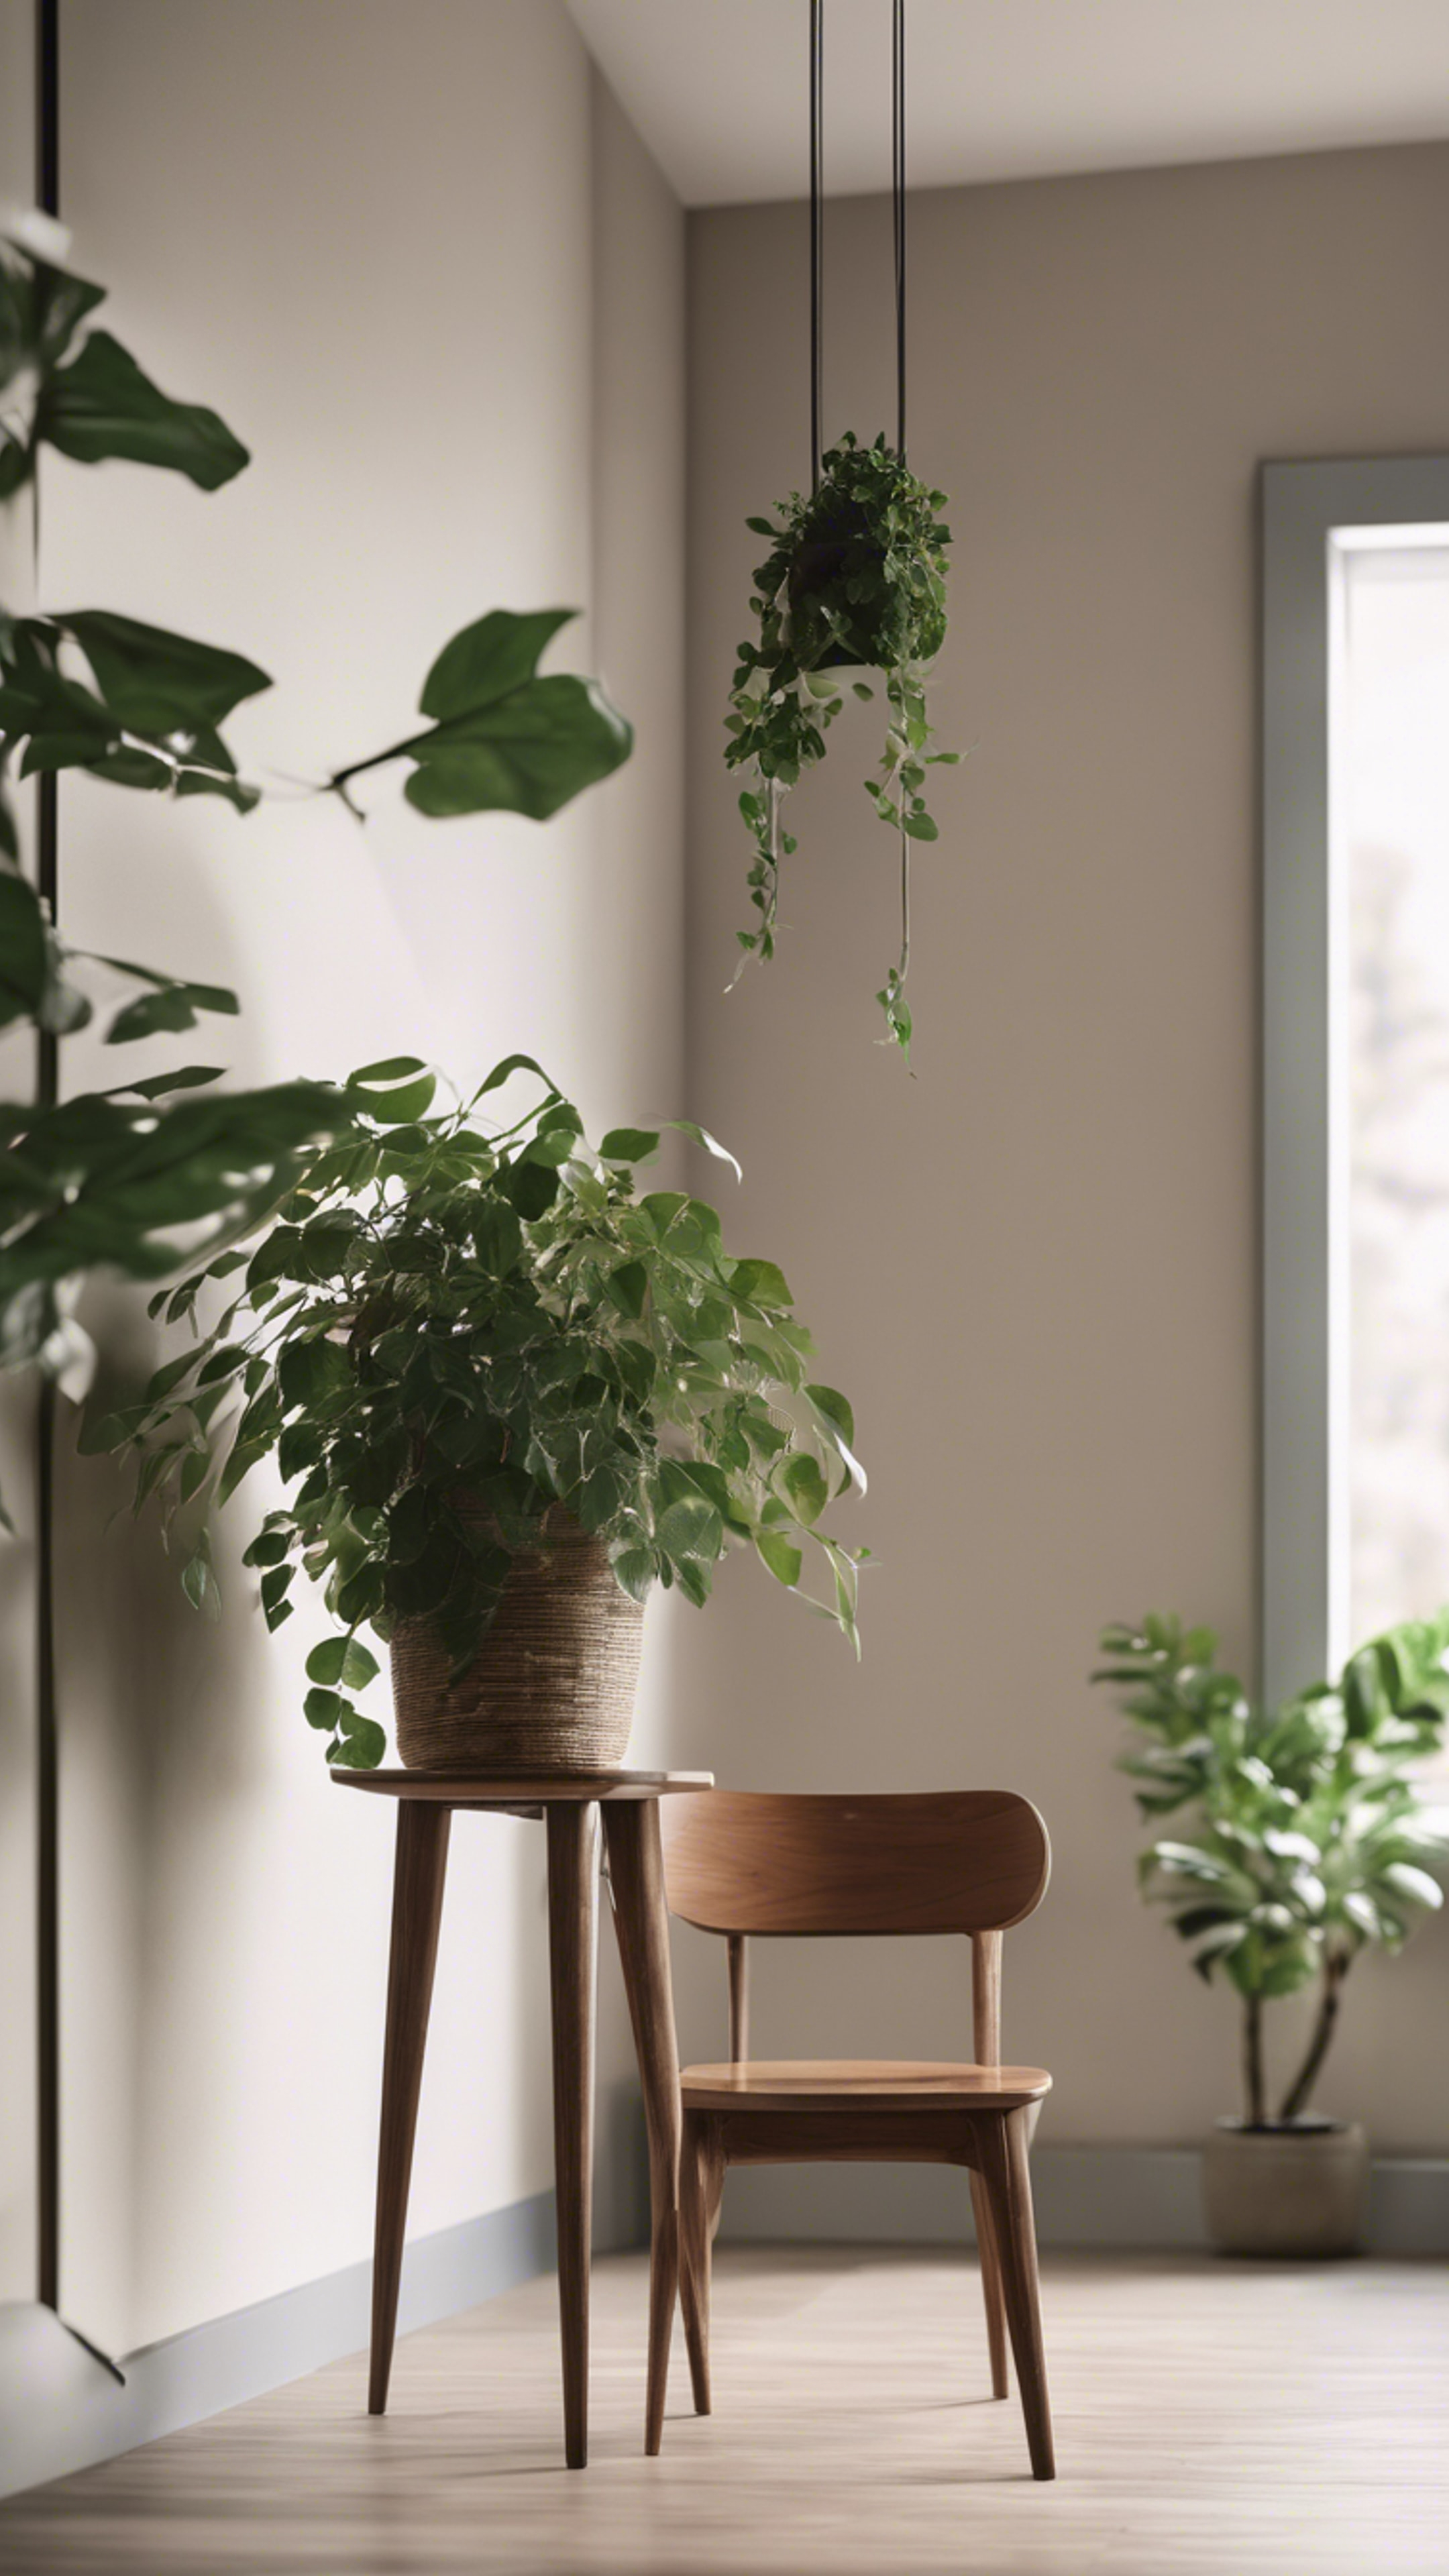 The corner of a minimalist room, featuring a hanging plant and a low, wooden side table. Tapeta[20a0de2ec9c541069b04]